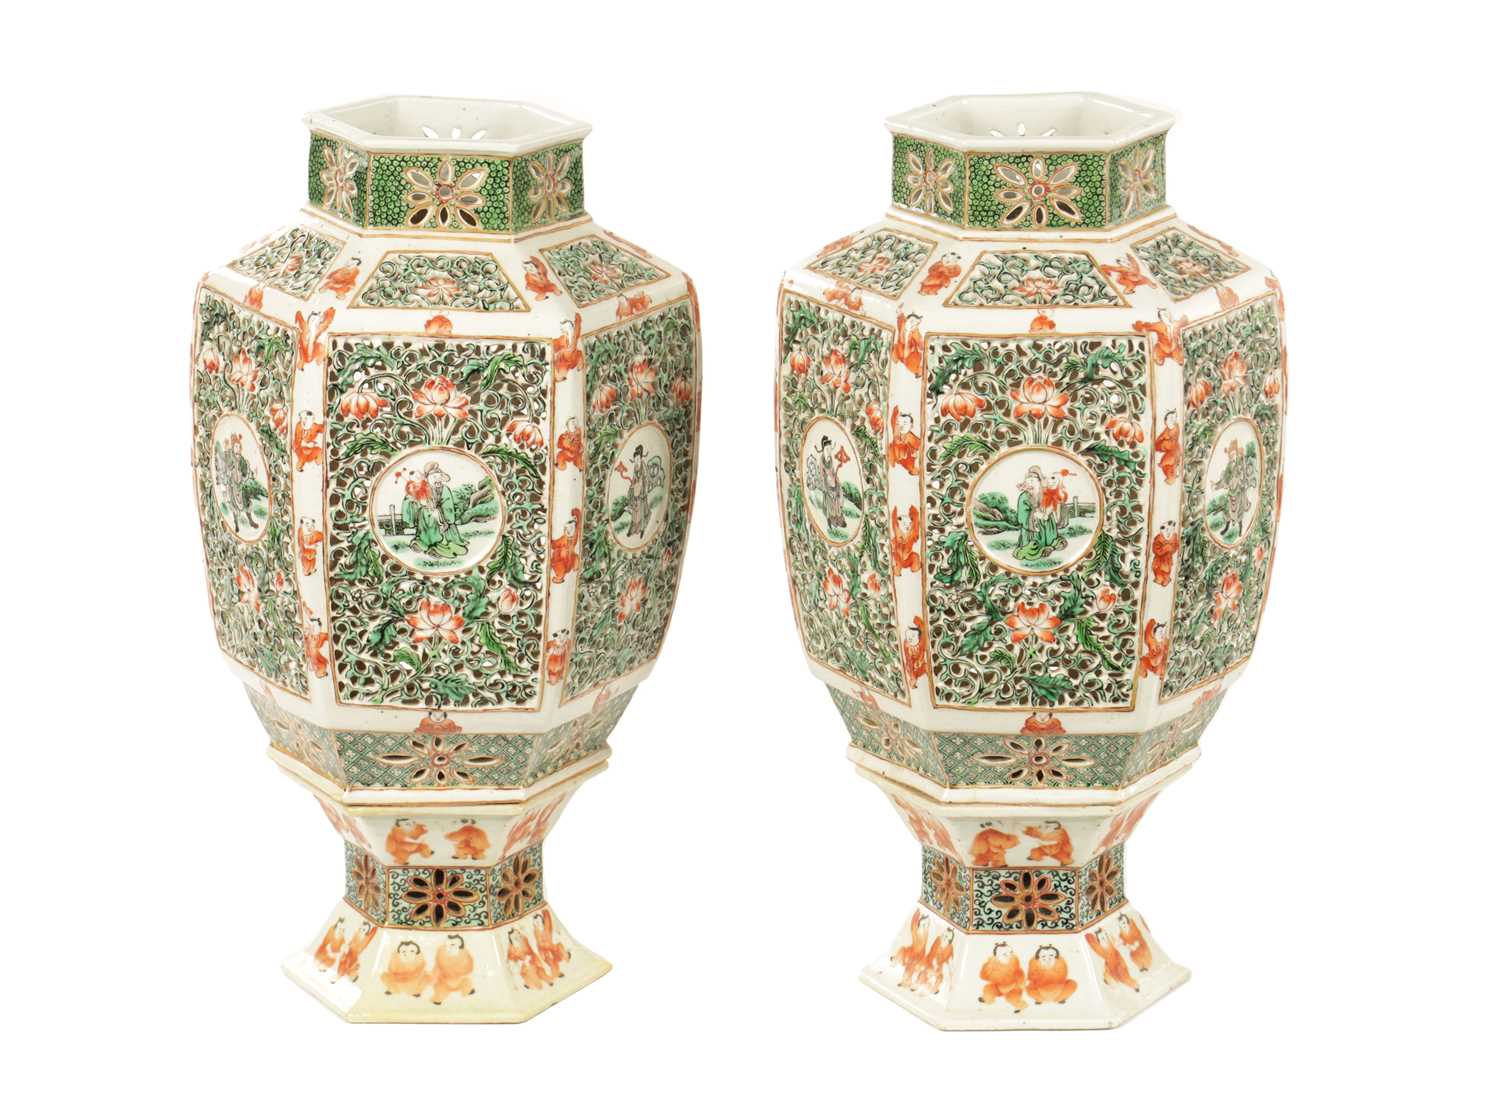 A PAIR OF 19TH CENTURY CHINESE FAMILLE VERTE LANTERNS